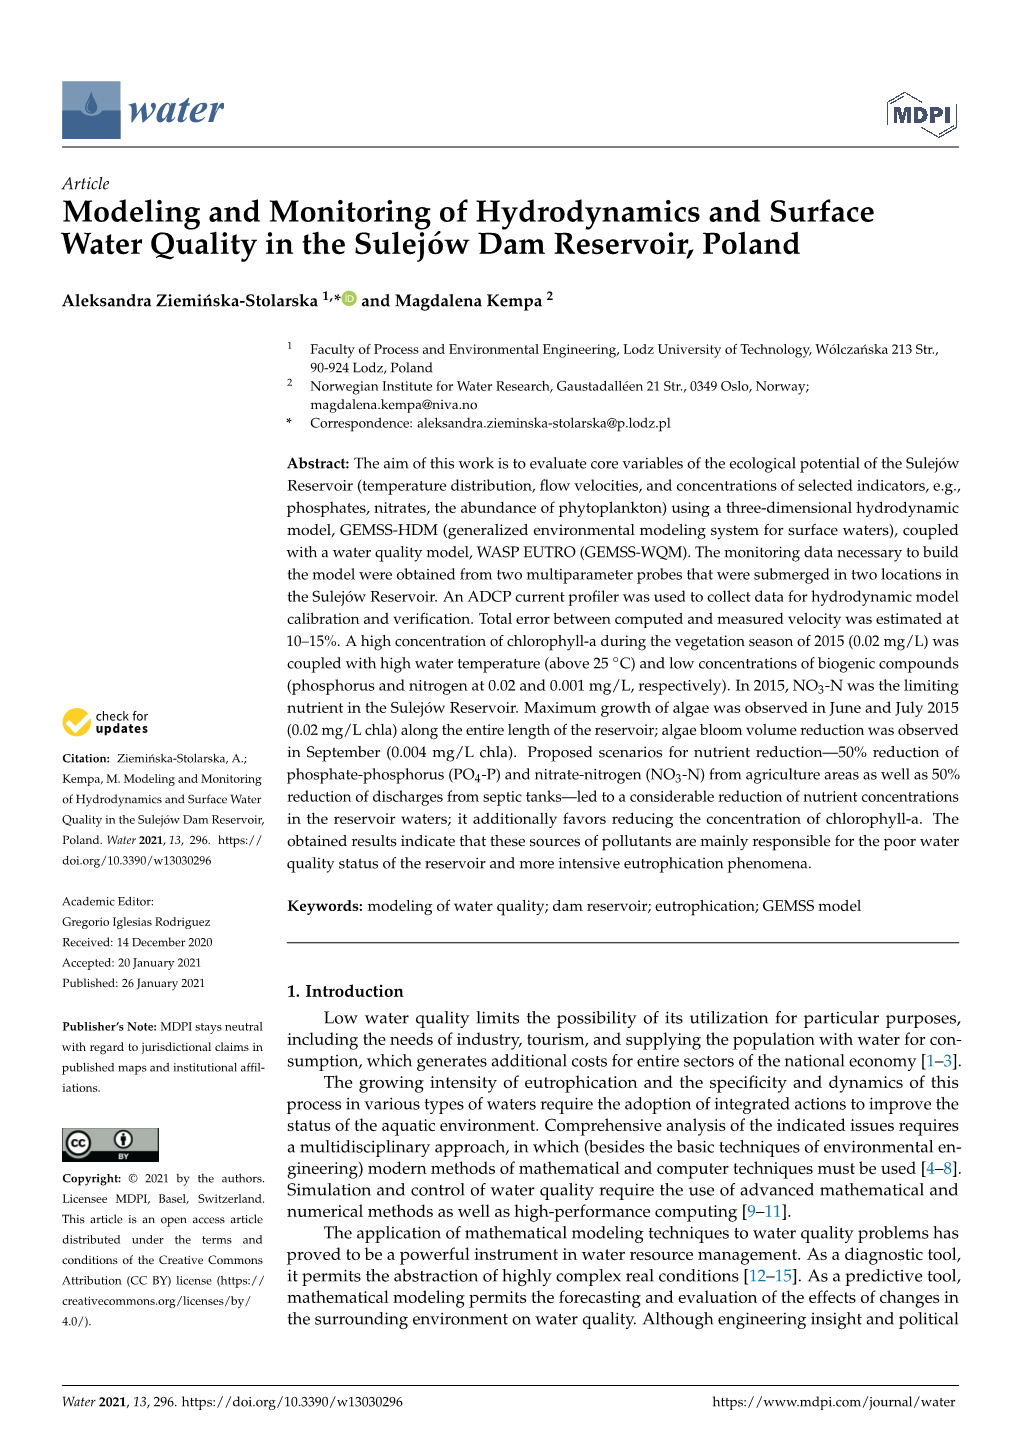 Modeling and Monitoring of Hydrodynamics and Surface Water Quality in the Sulejów Dam Reservoir, Poland